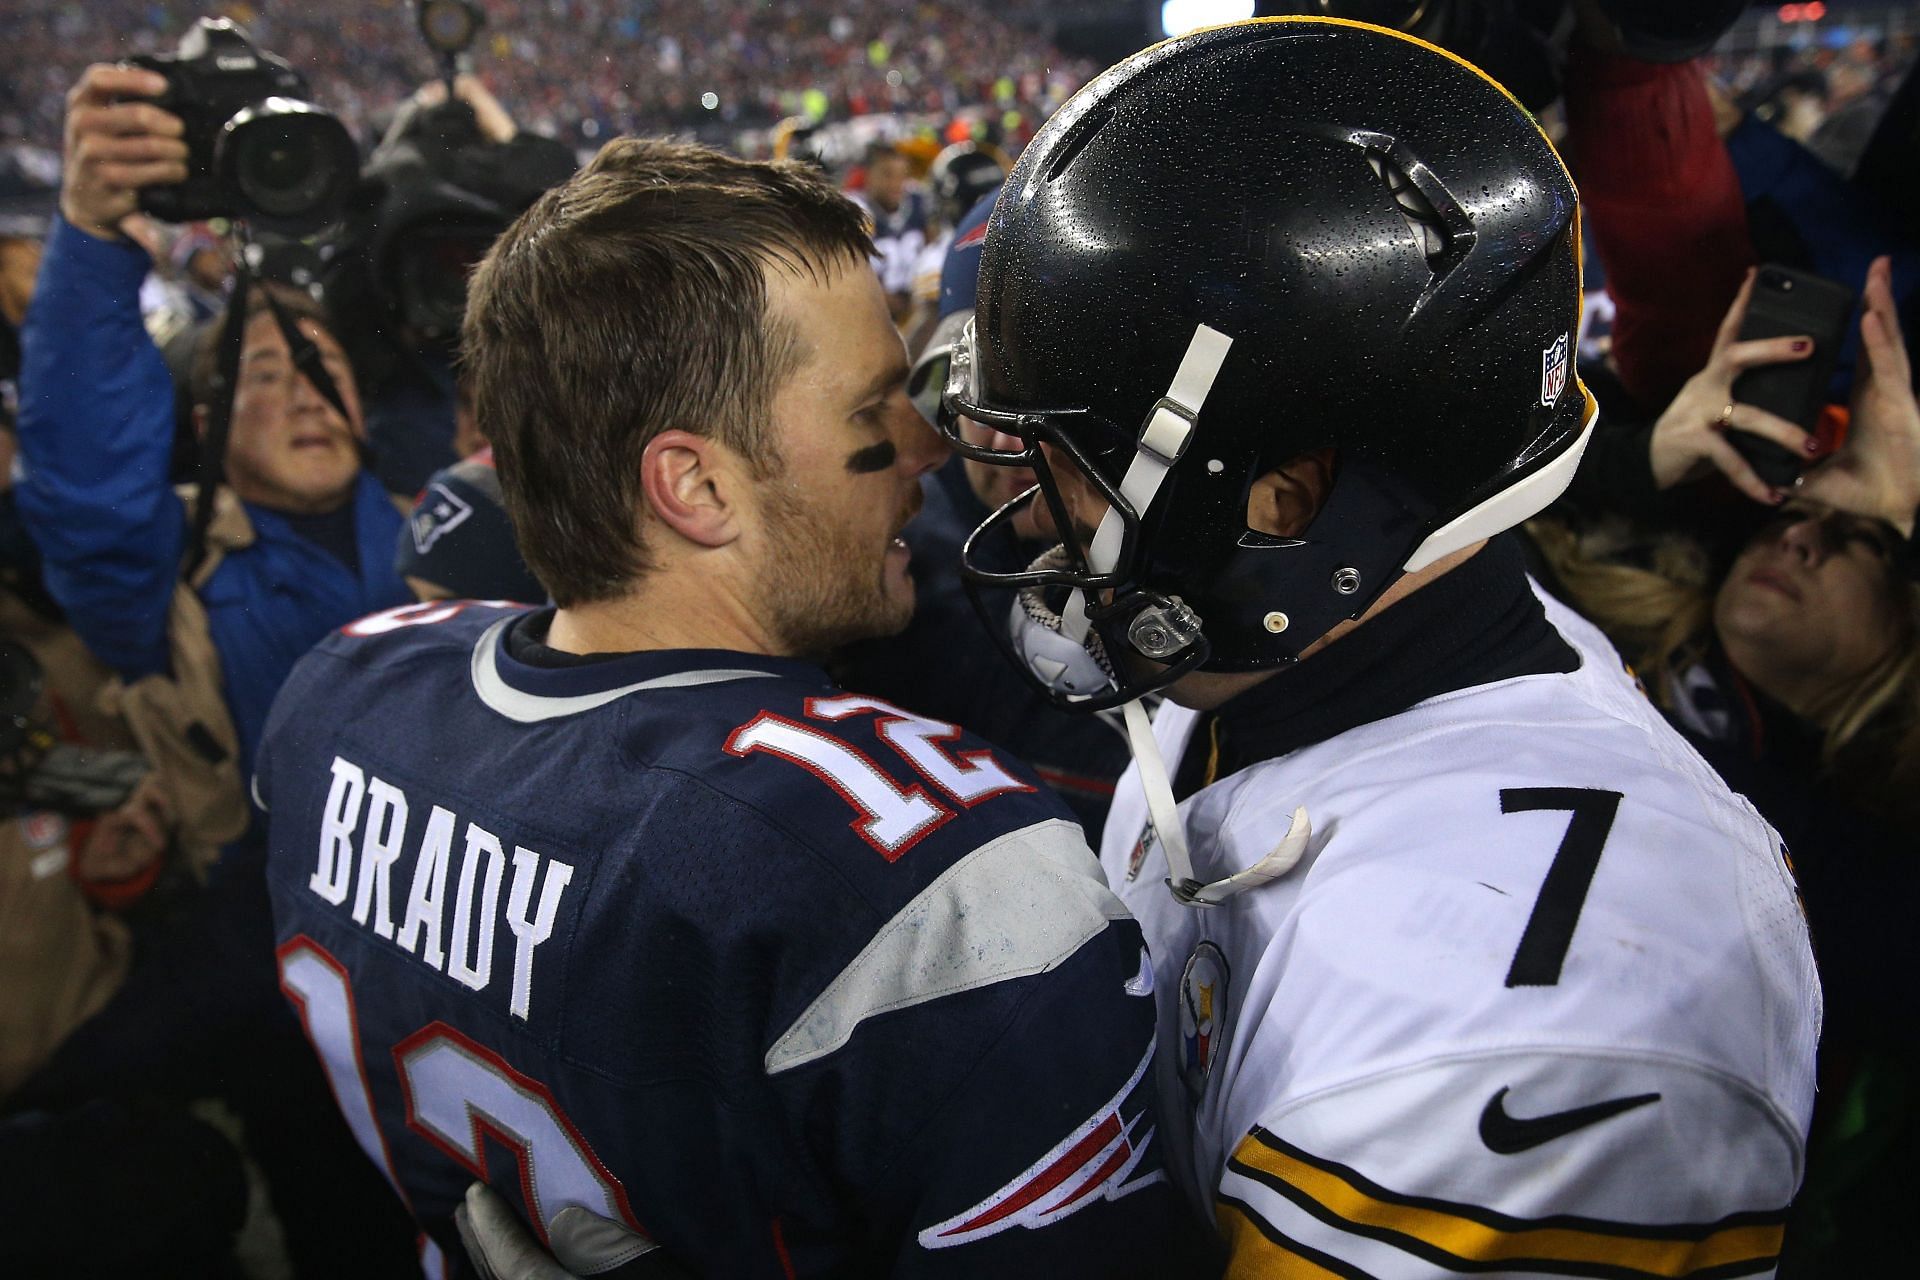 Brady and Roethlisberger after the 2017 AFC title game (Photo: Getty)